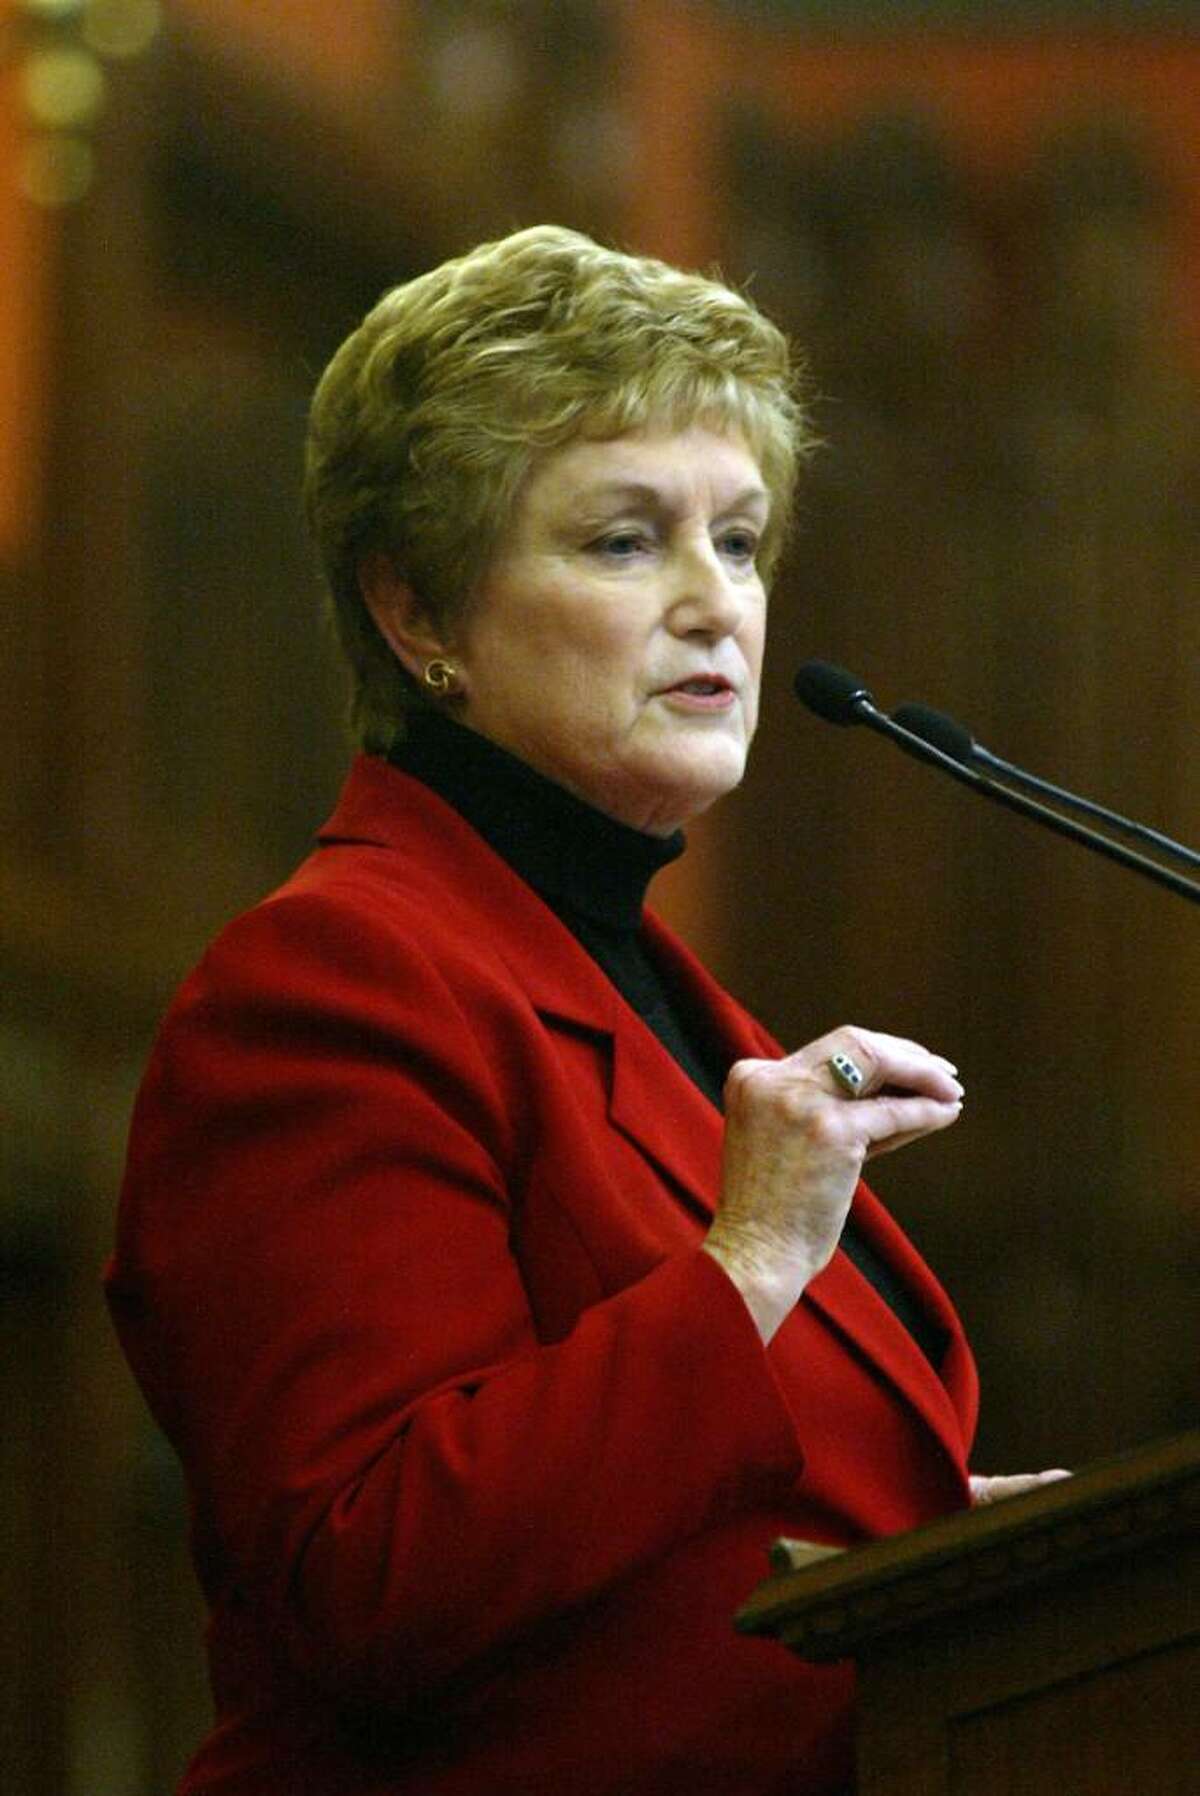 Governor, M. Jodi Rell gives her annual budget address, Wednesday, Feb. 3, 2010, at the State Capital in Hartford.